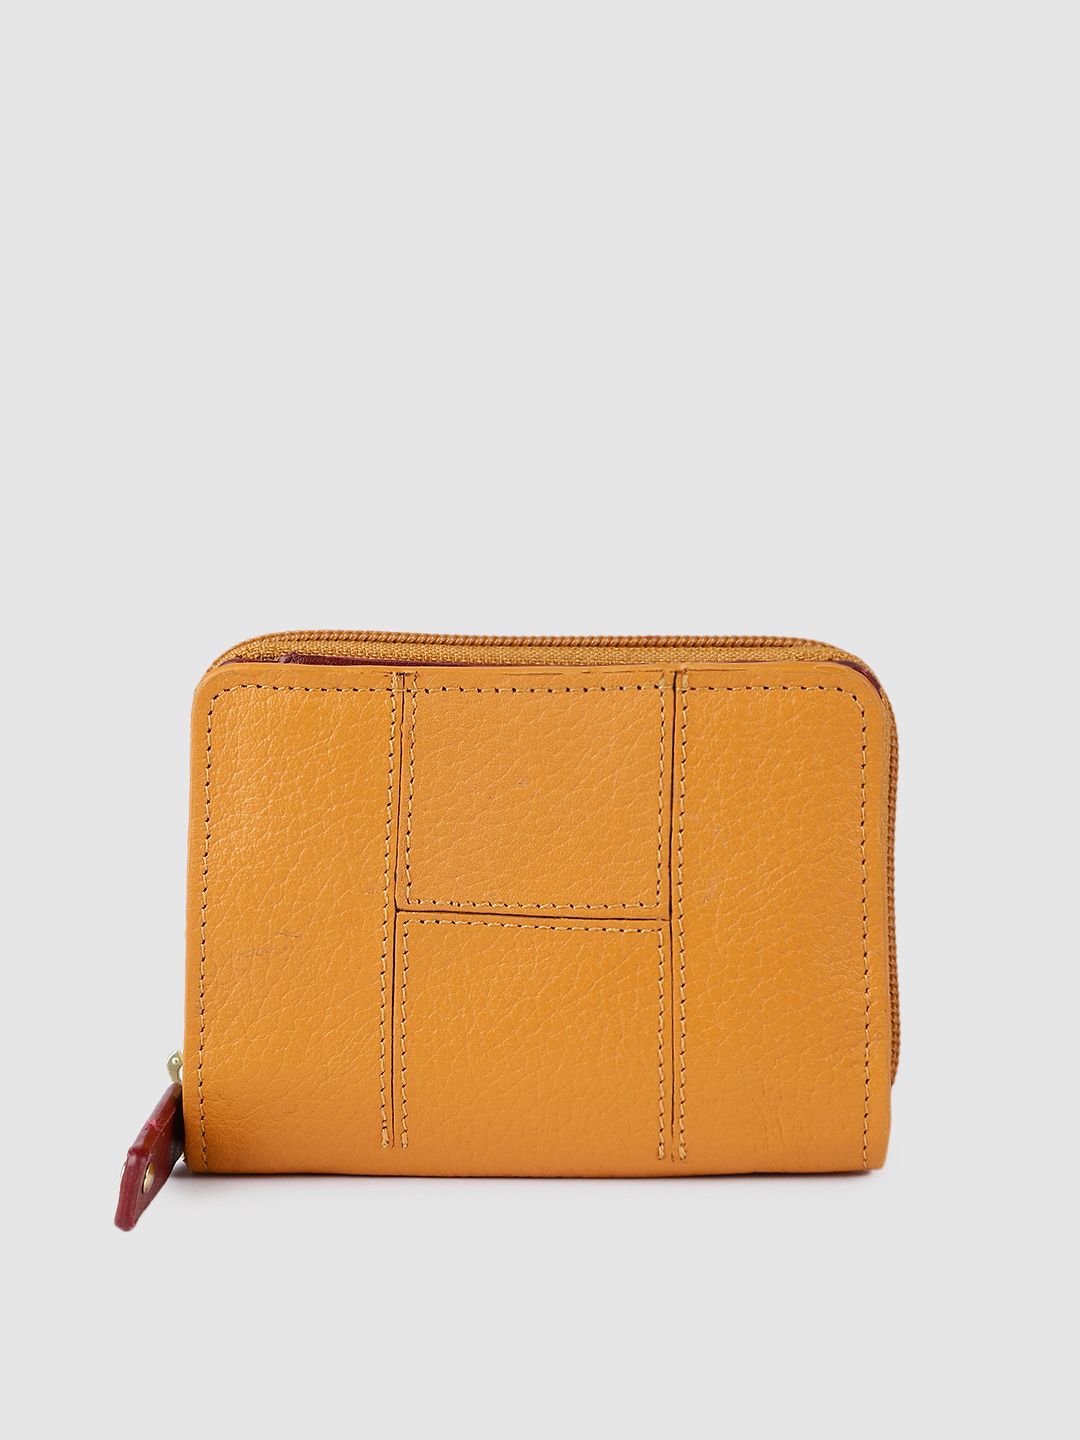 Hidesign Women Mustard Leather Two Fold Wallet Price in India